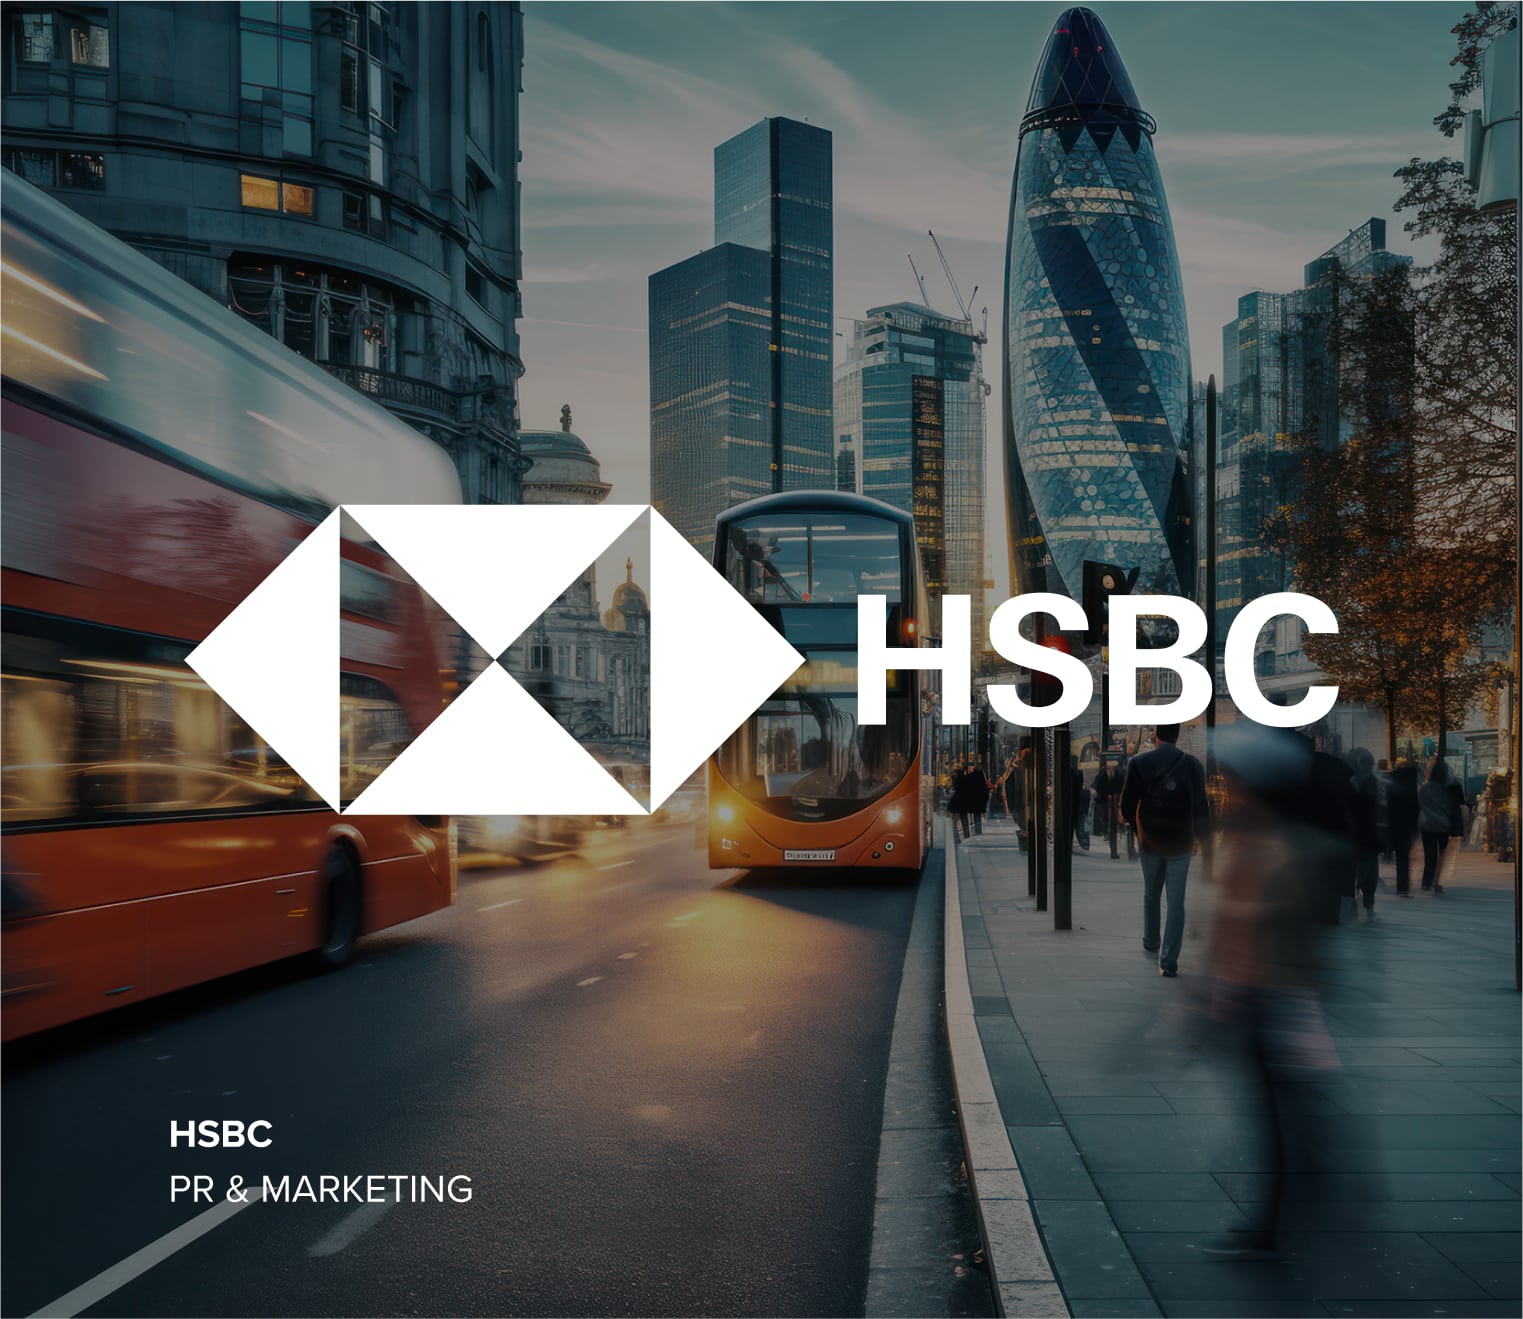 HSBC logo in white over a color image of a city street with buses, pedestrians, and skyscrapers.